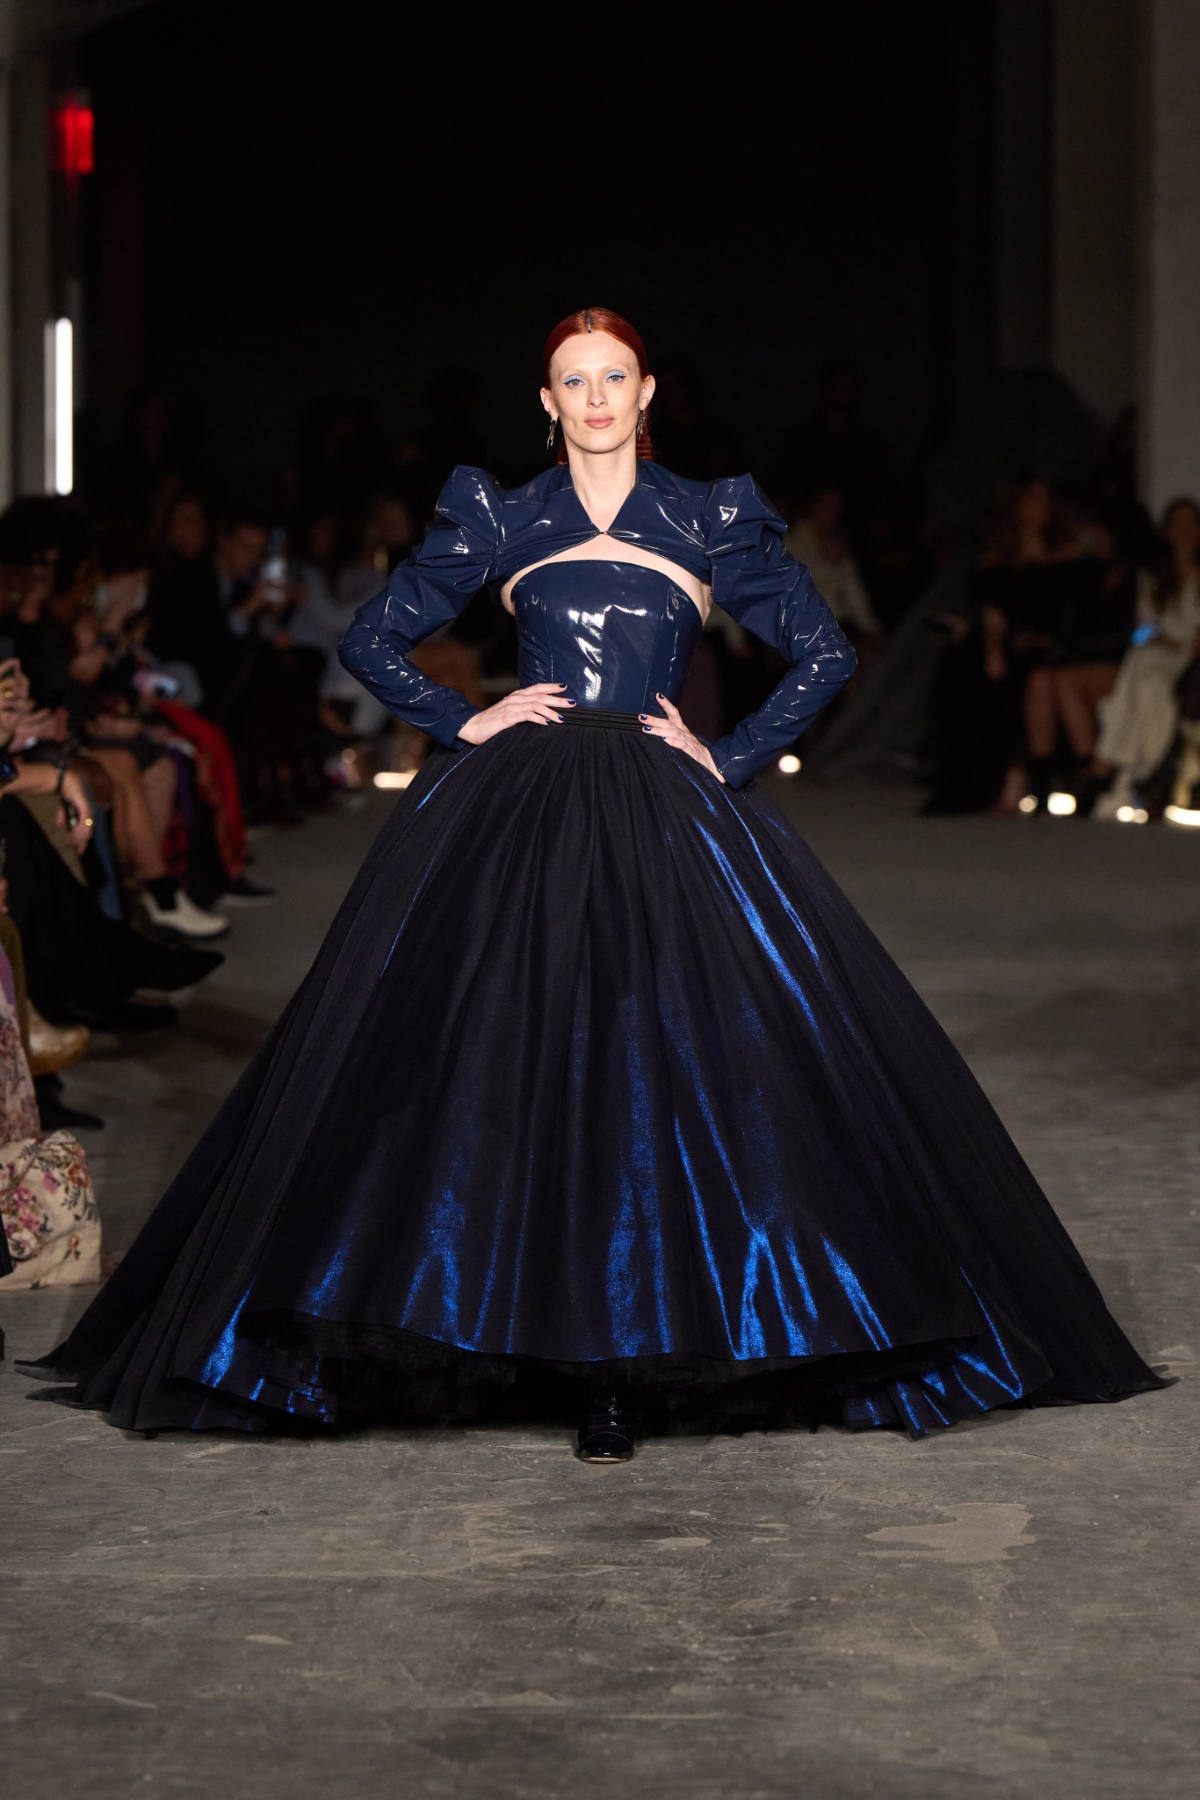 Christian Siriano Presents Its Fall/Winter 2022 Collection